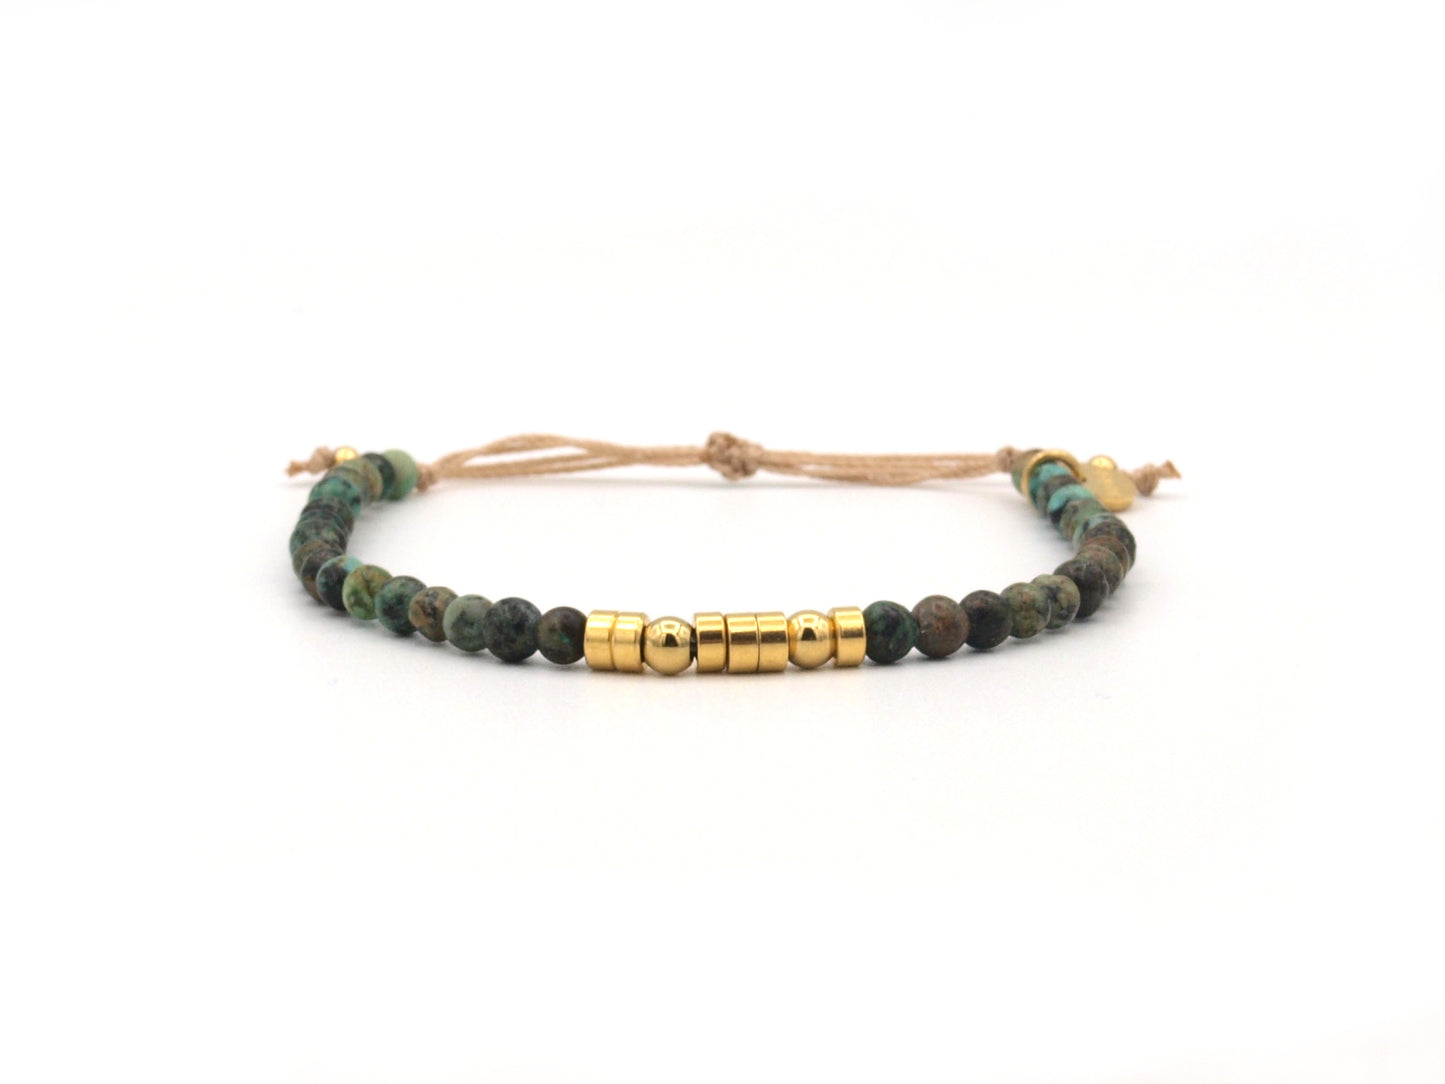 Personalized morse code bracelet, African turquoise and stainless steel